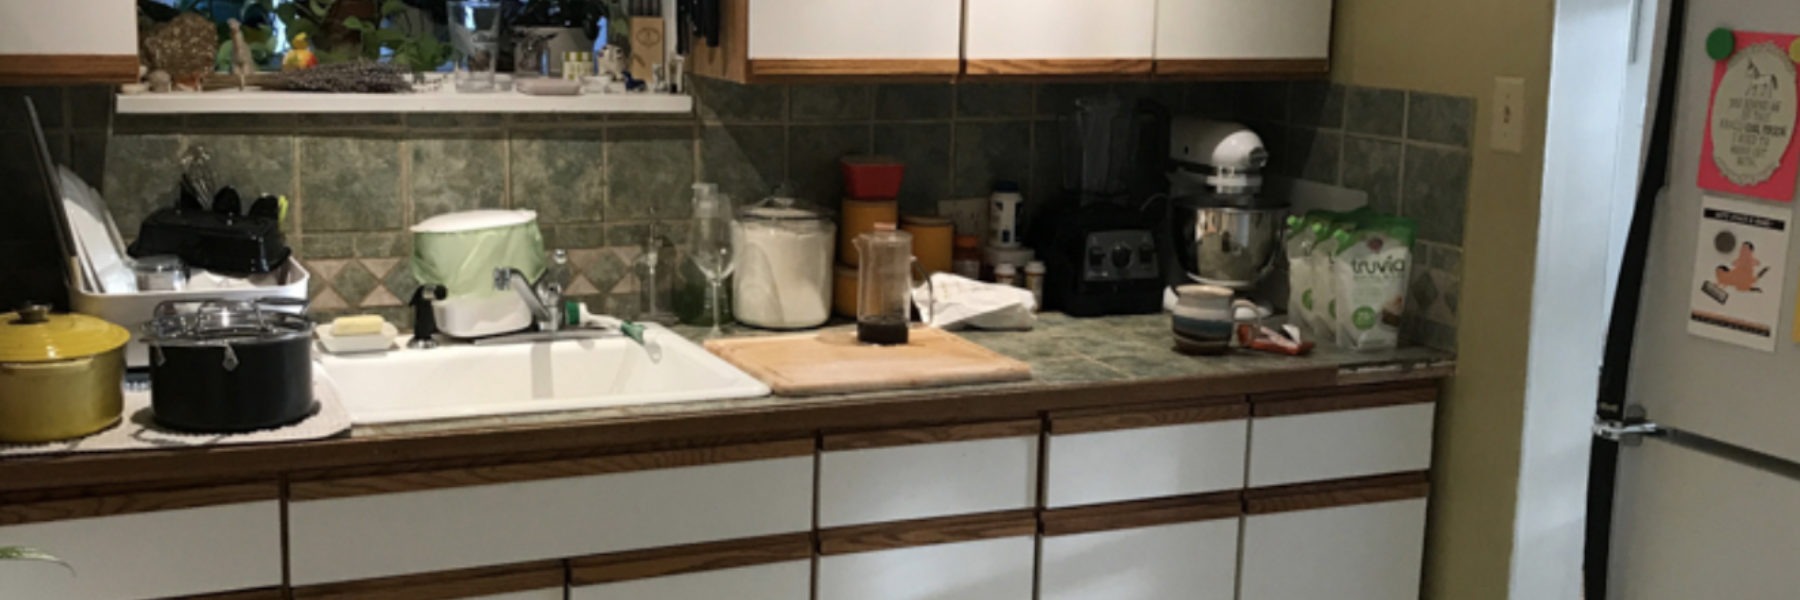 old white cabinets before renovation